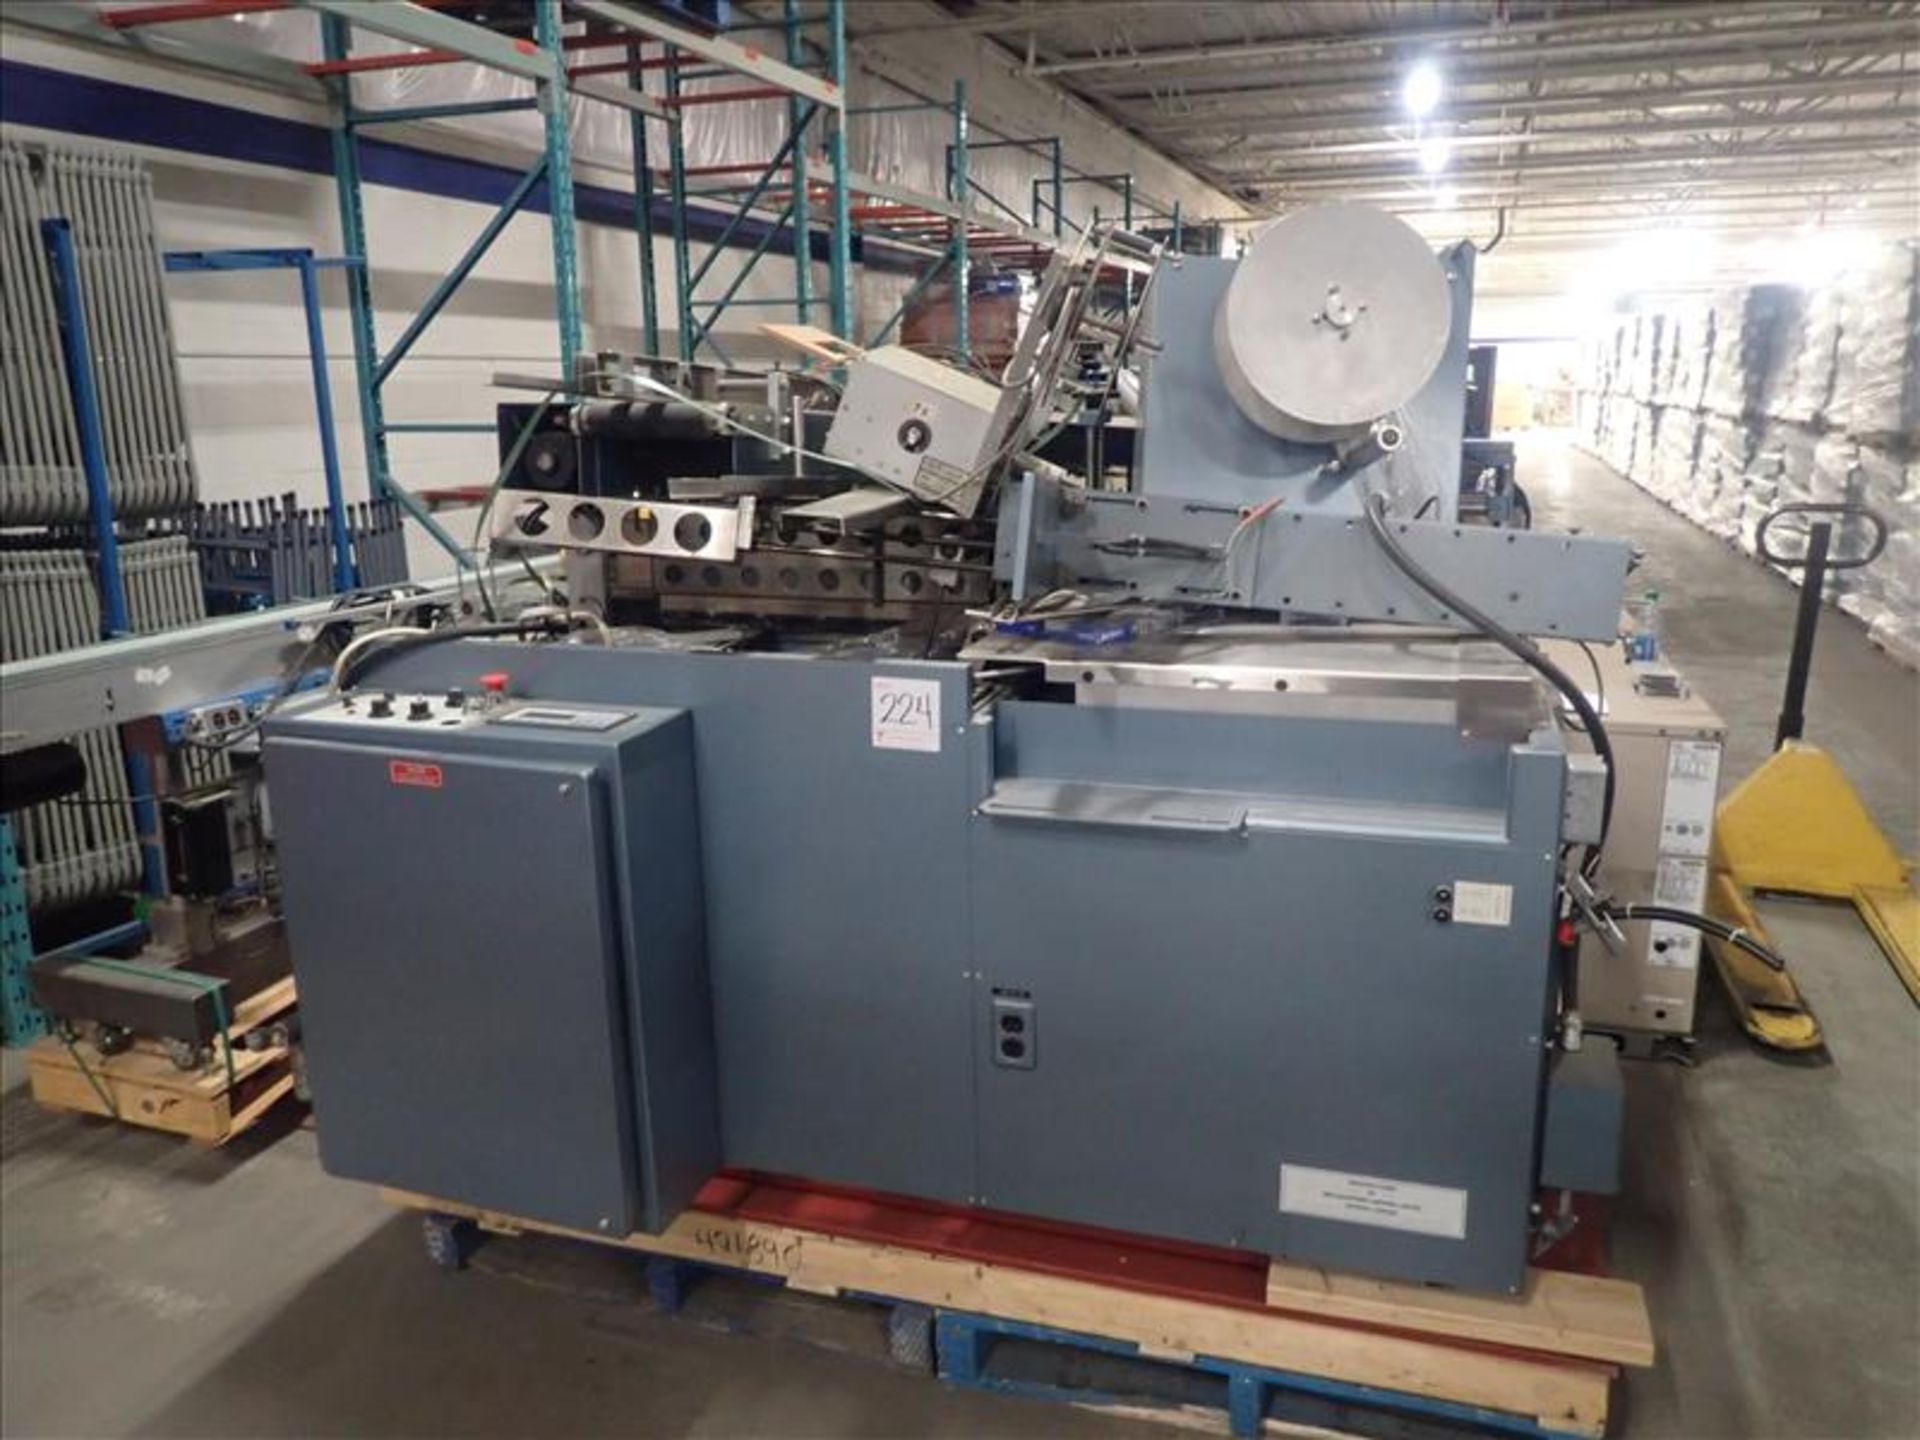 RBS automatic sealing machine, mod. RALS, ser. no. 38-0073, size 20 x 24 w/ rewinder and Label-All